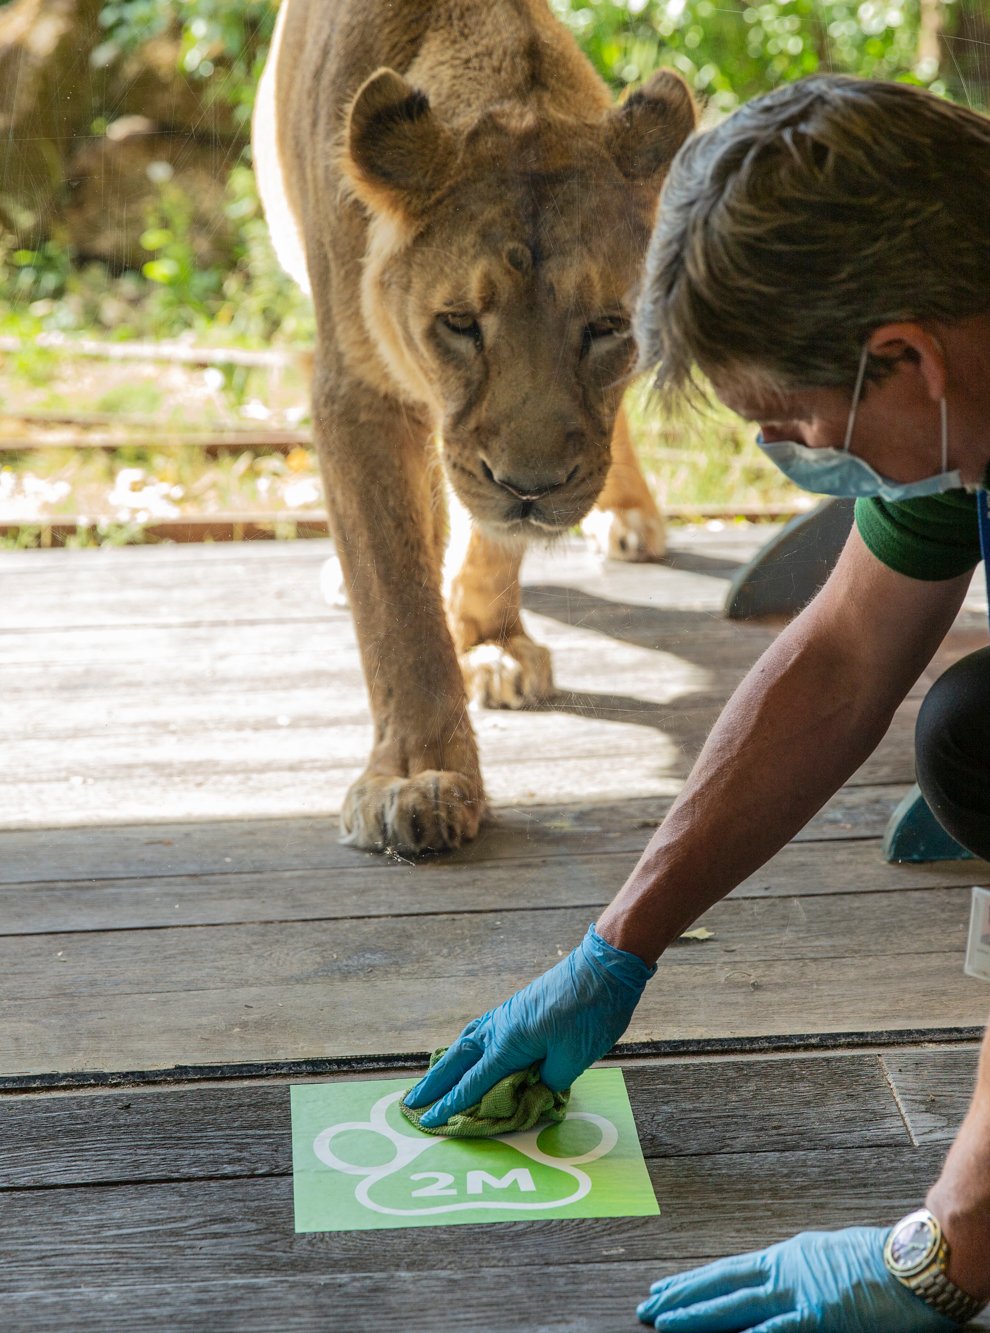 ZSL London Zoo installs social distance markers to prepare for reopening (ZSL/PA)